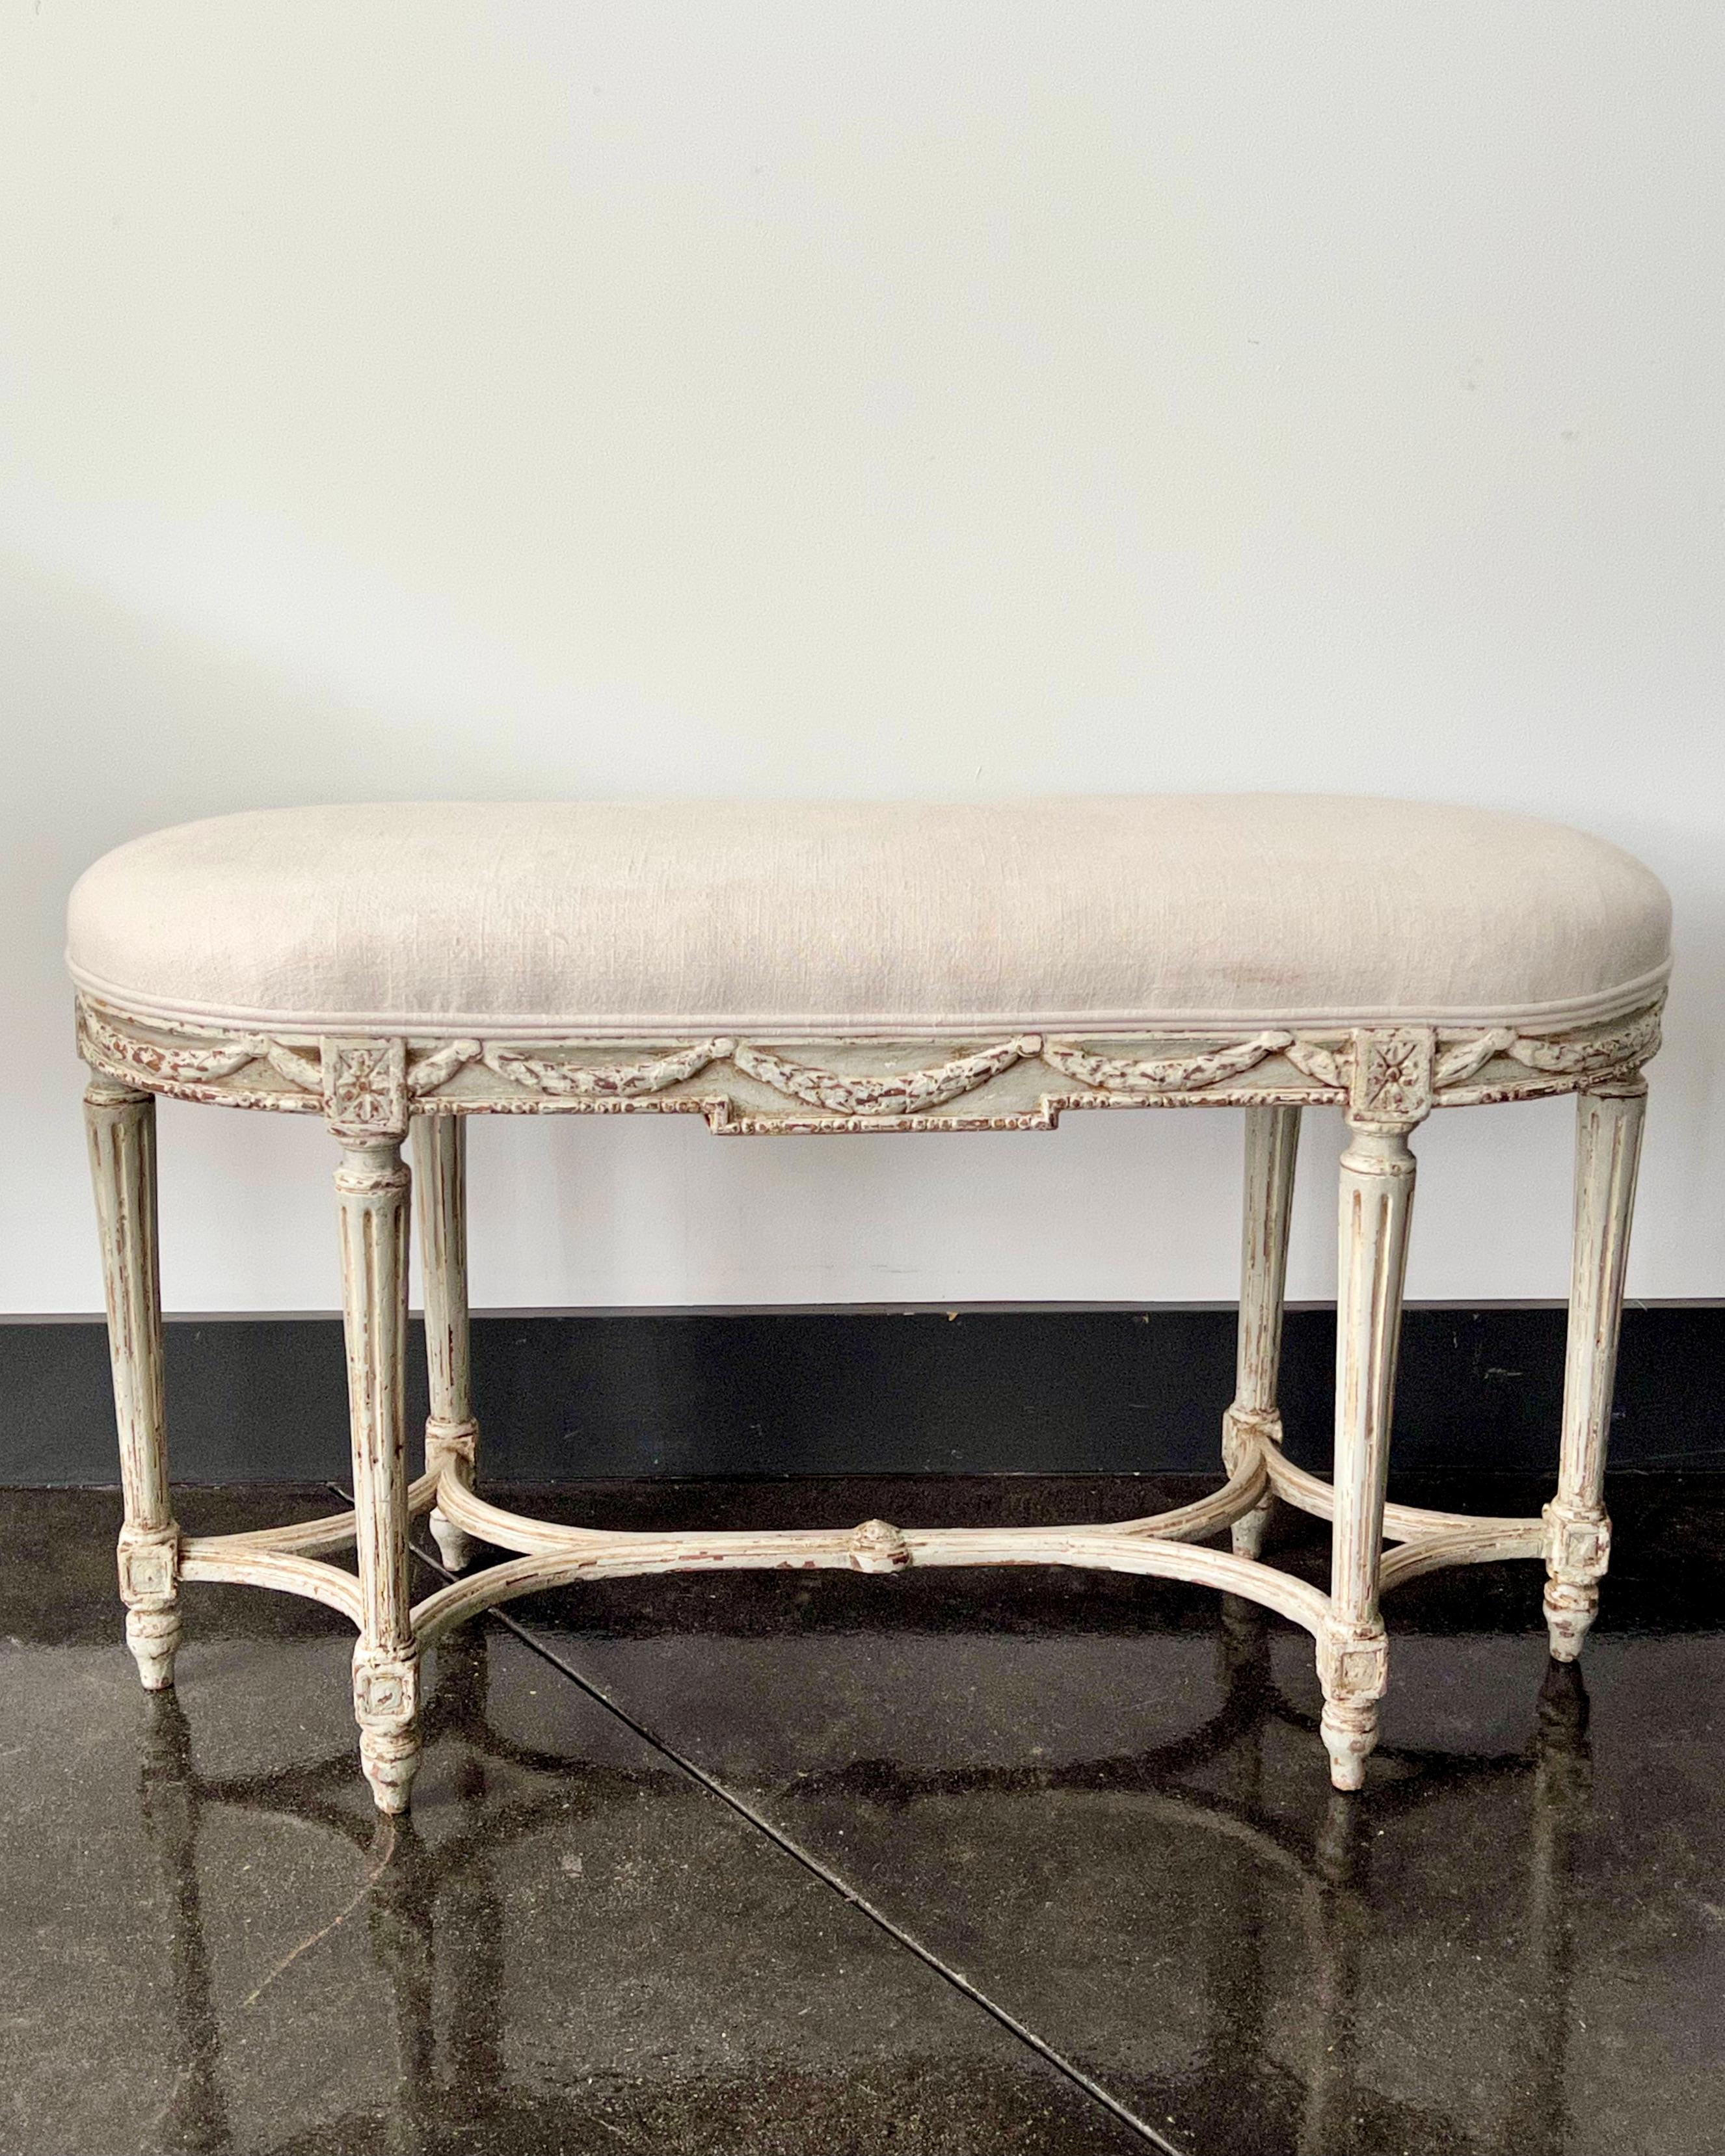 A small bench in Louis XVI style with scalloped frieze carved in floret motifs, raised on tapered legs and joined with double x-curved stretchers. Upholstered in linen. 
 